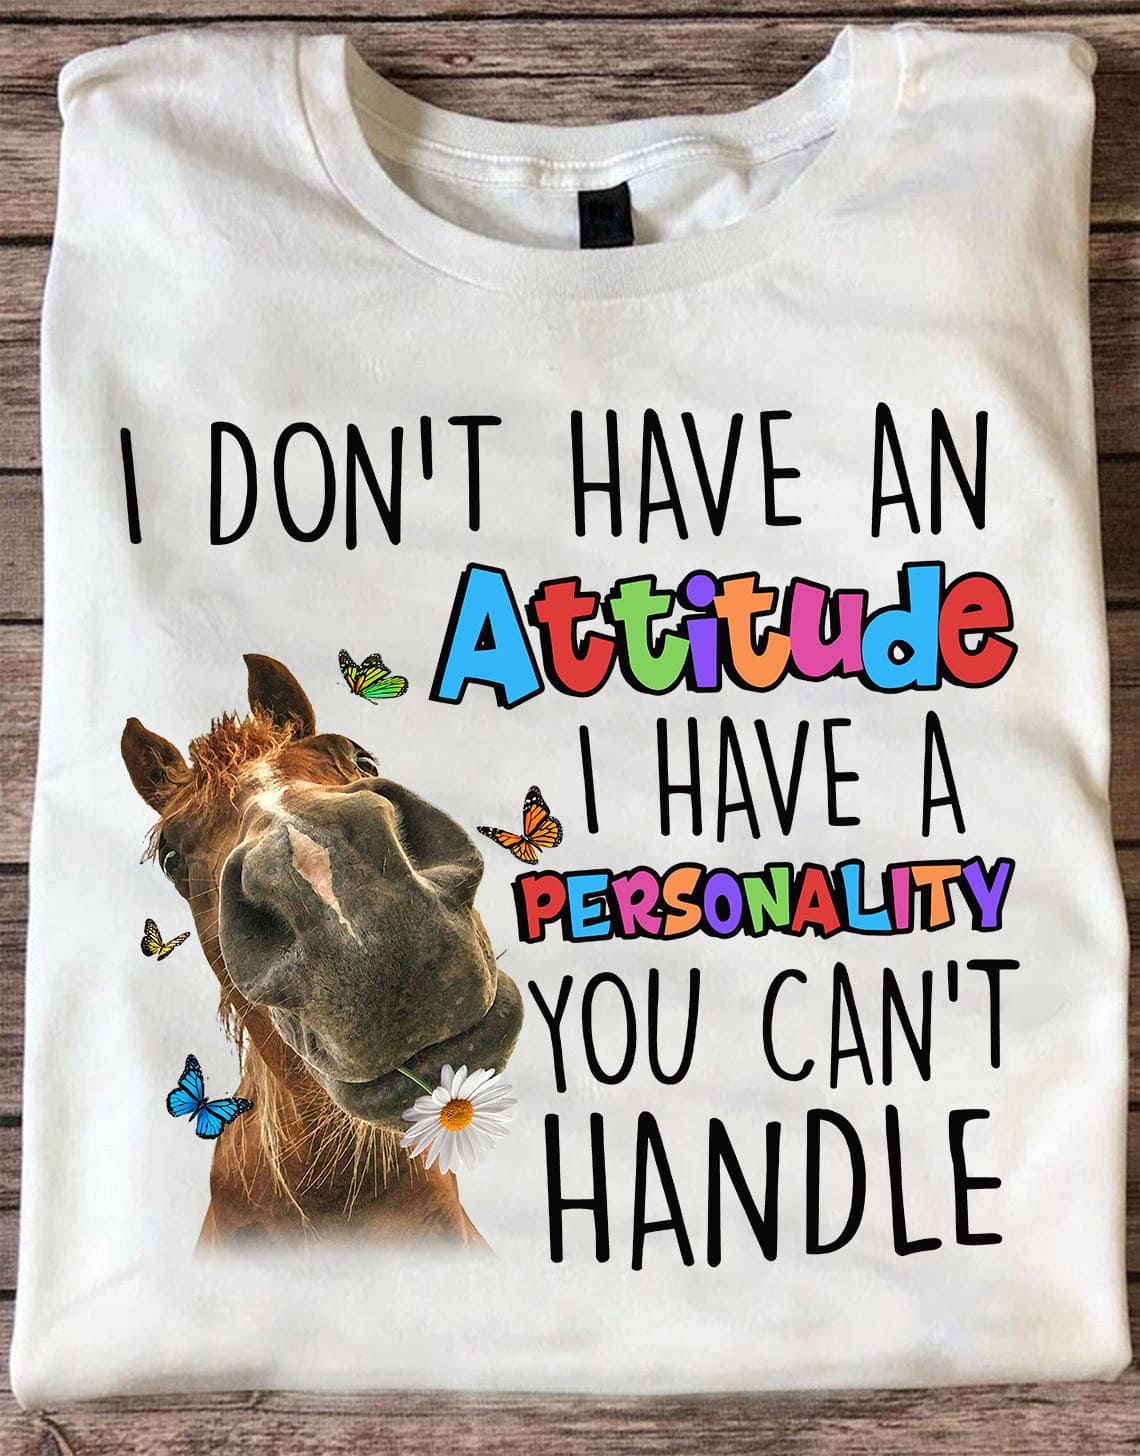 I don't have an attitude I have a personality you can't handle - Funny horse T-shirt